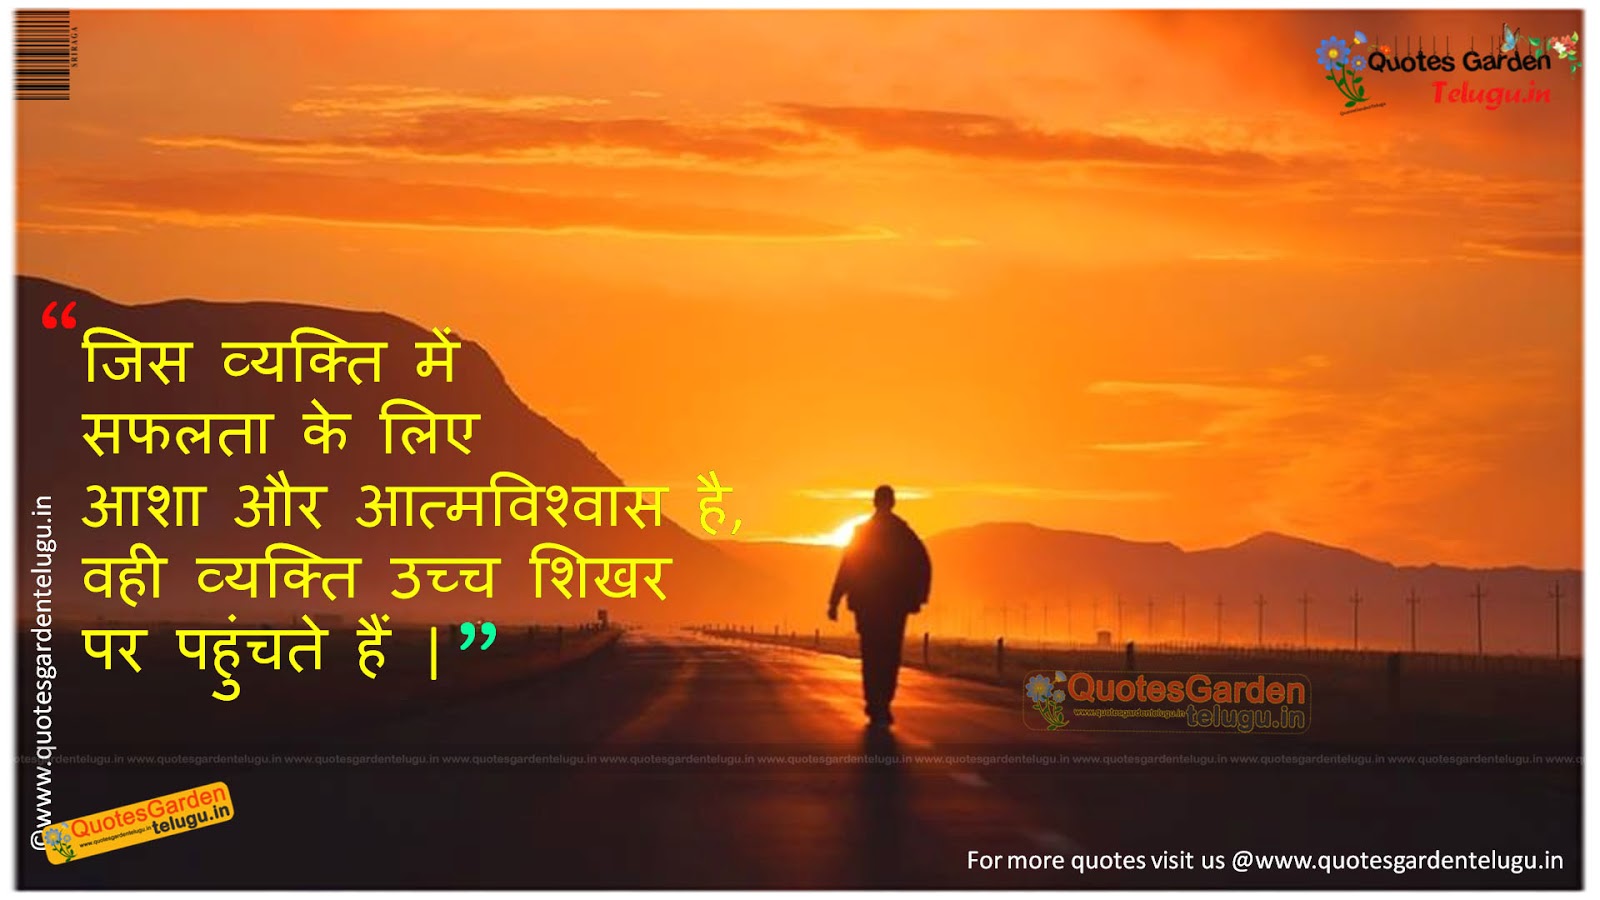 Best success quotes in hindi with hd wallpapers 1208 | QUOTES GARDEN TELUGU  | Telugu Quotes | English Quotes | Hindi Quotes |